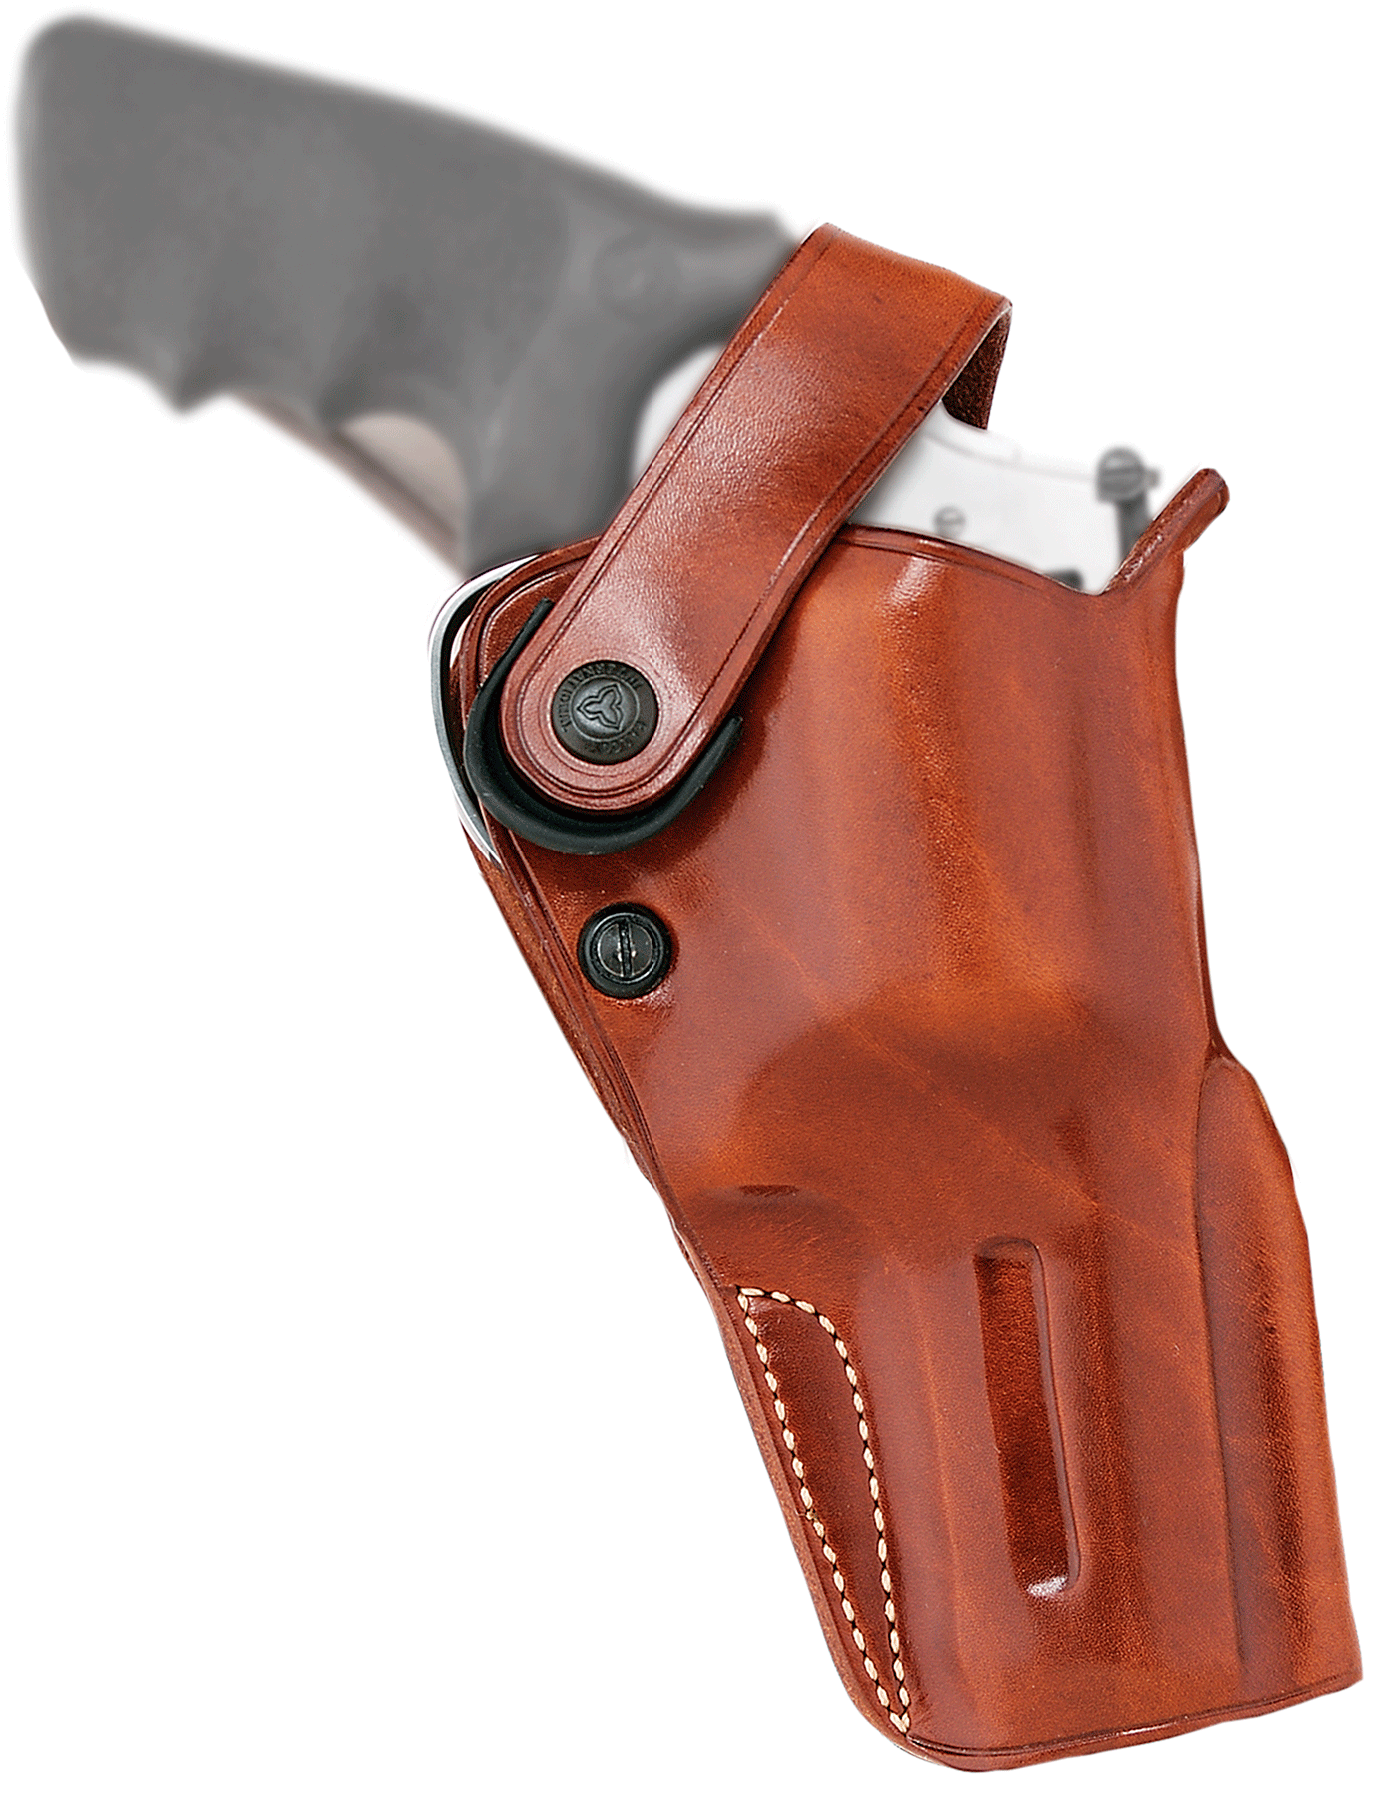 Galco Galco Dao Belt Holster Rh Lthr - Taurus Judge 3" 32" Cyl Tan Holsters And Related Items